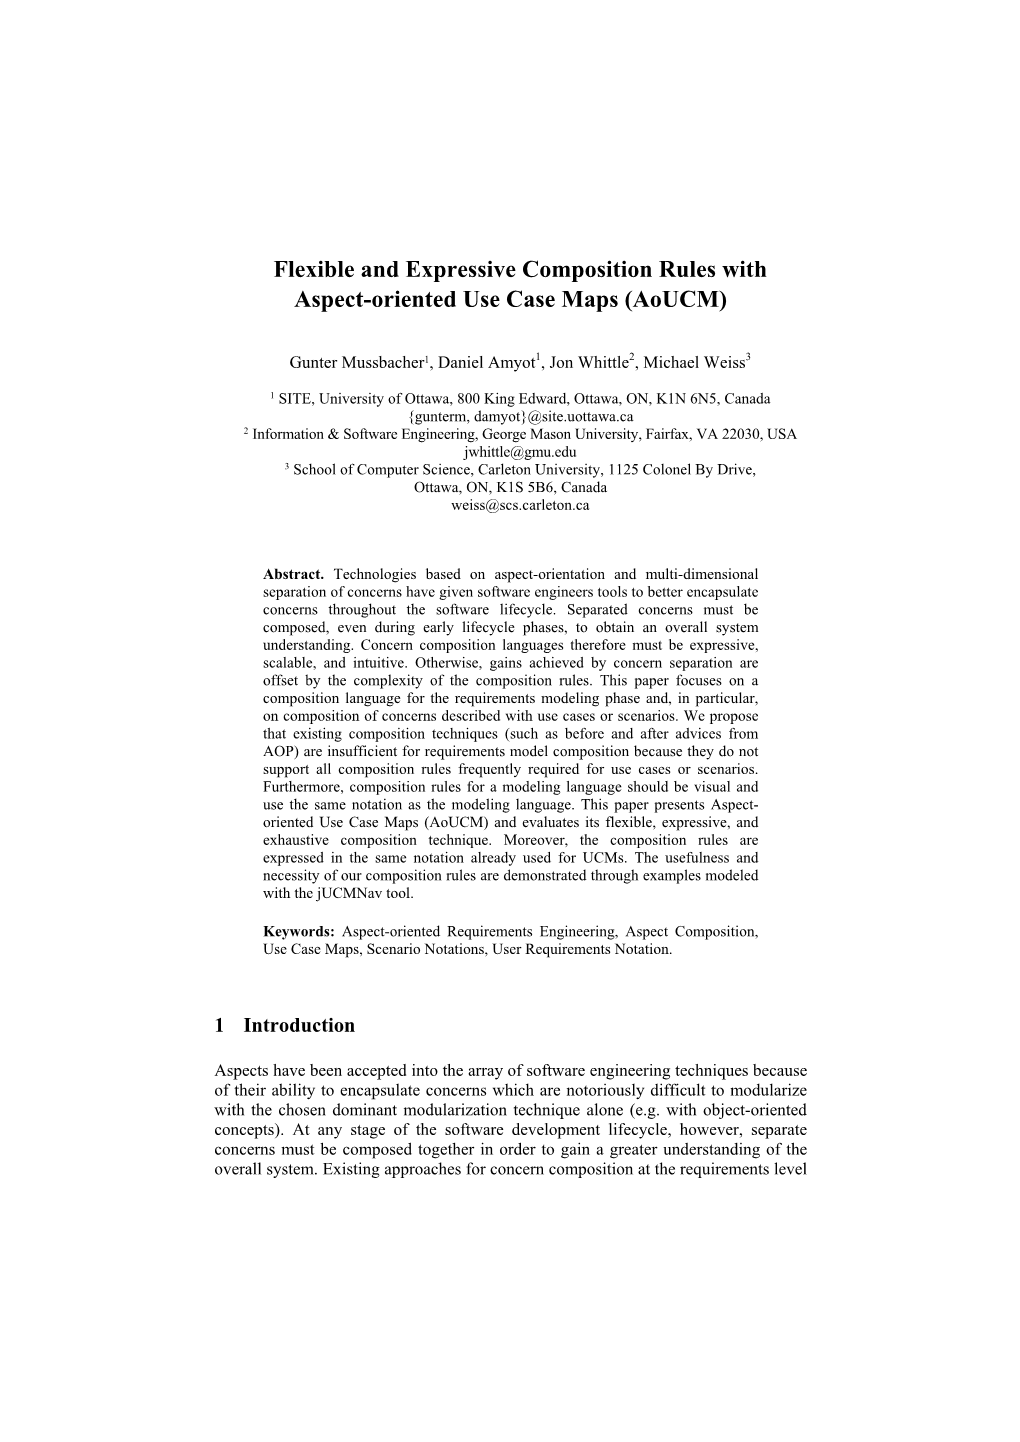 Flexible and Expressive Composition Rules with Aspect-Oriented Use Case Maps (Aoucm)